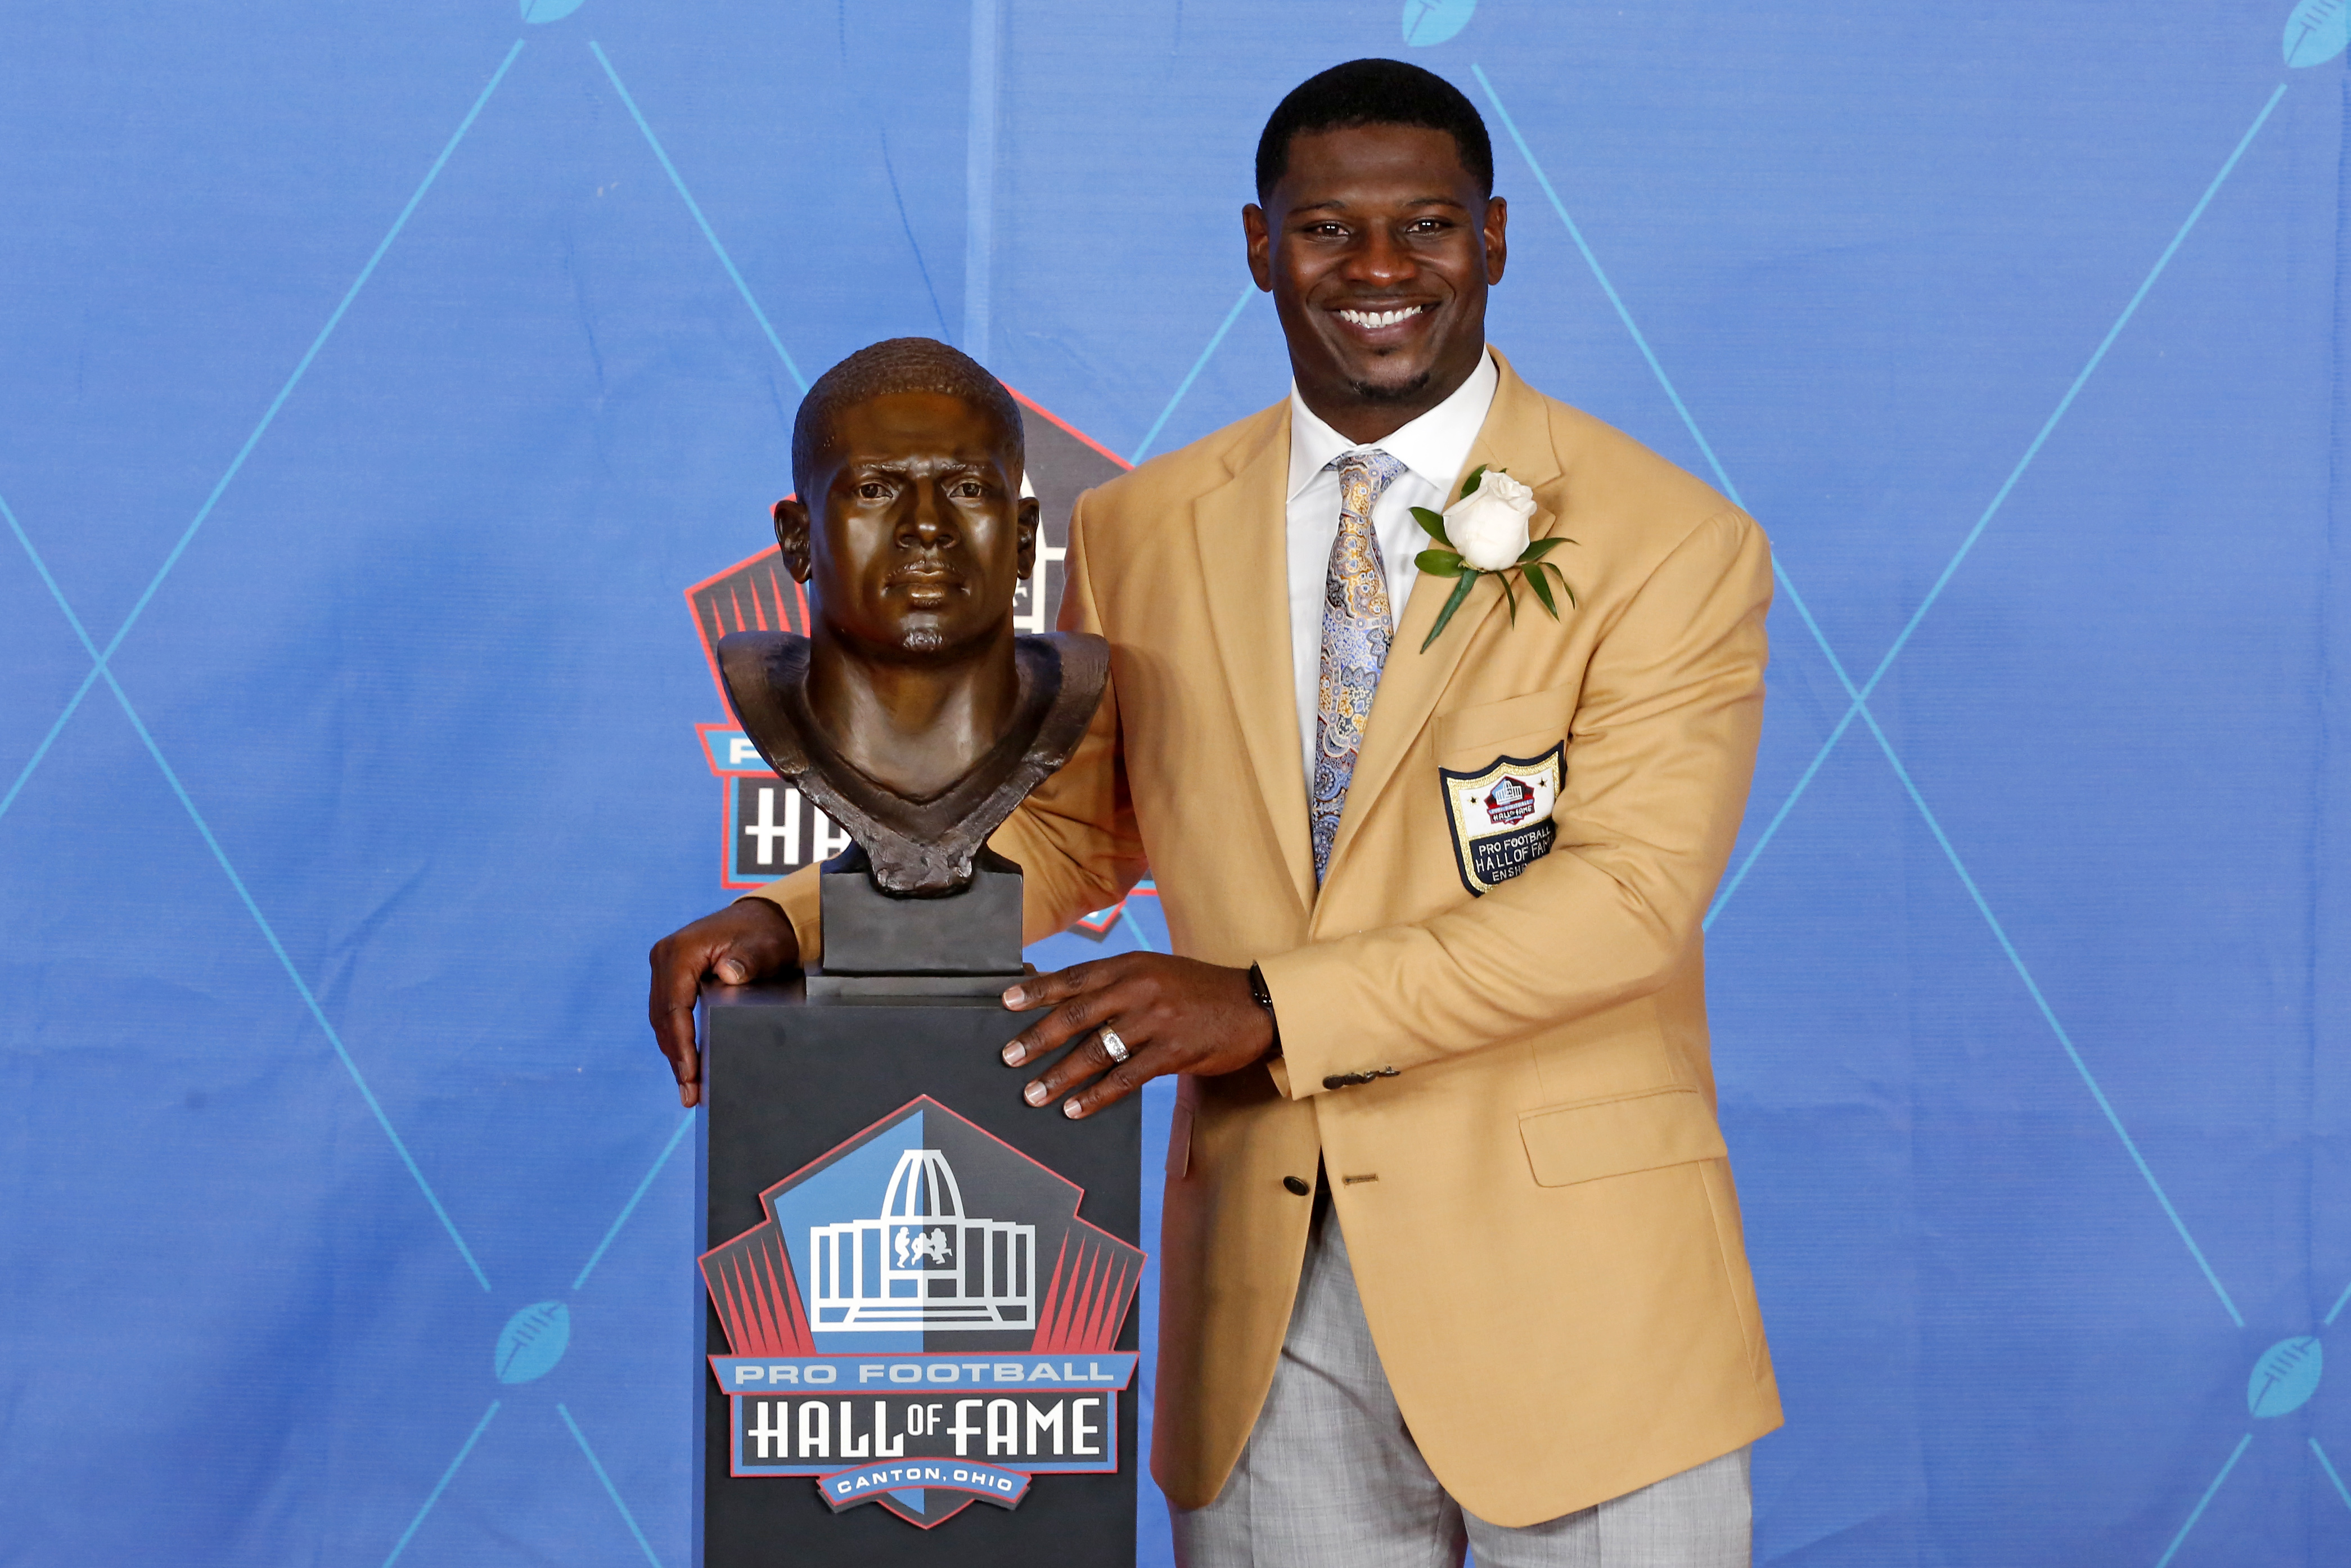 Former NFL player LaDainian Tomlinson poses with a bust of himself during an induction ceremony at the Pro Football Hall of Fame Saturday, Aug. 5, 2017, in Canton, Ohio. (Gene J. Puskar&mdash;AP)